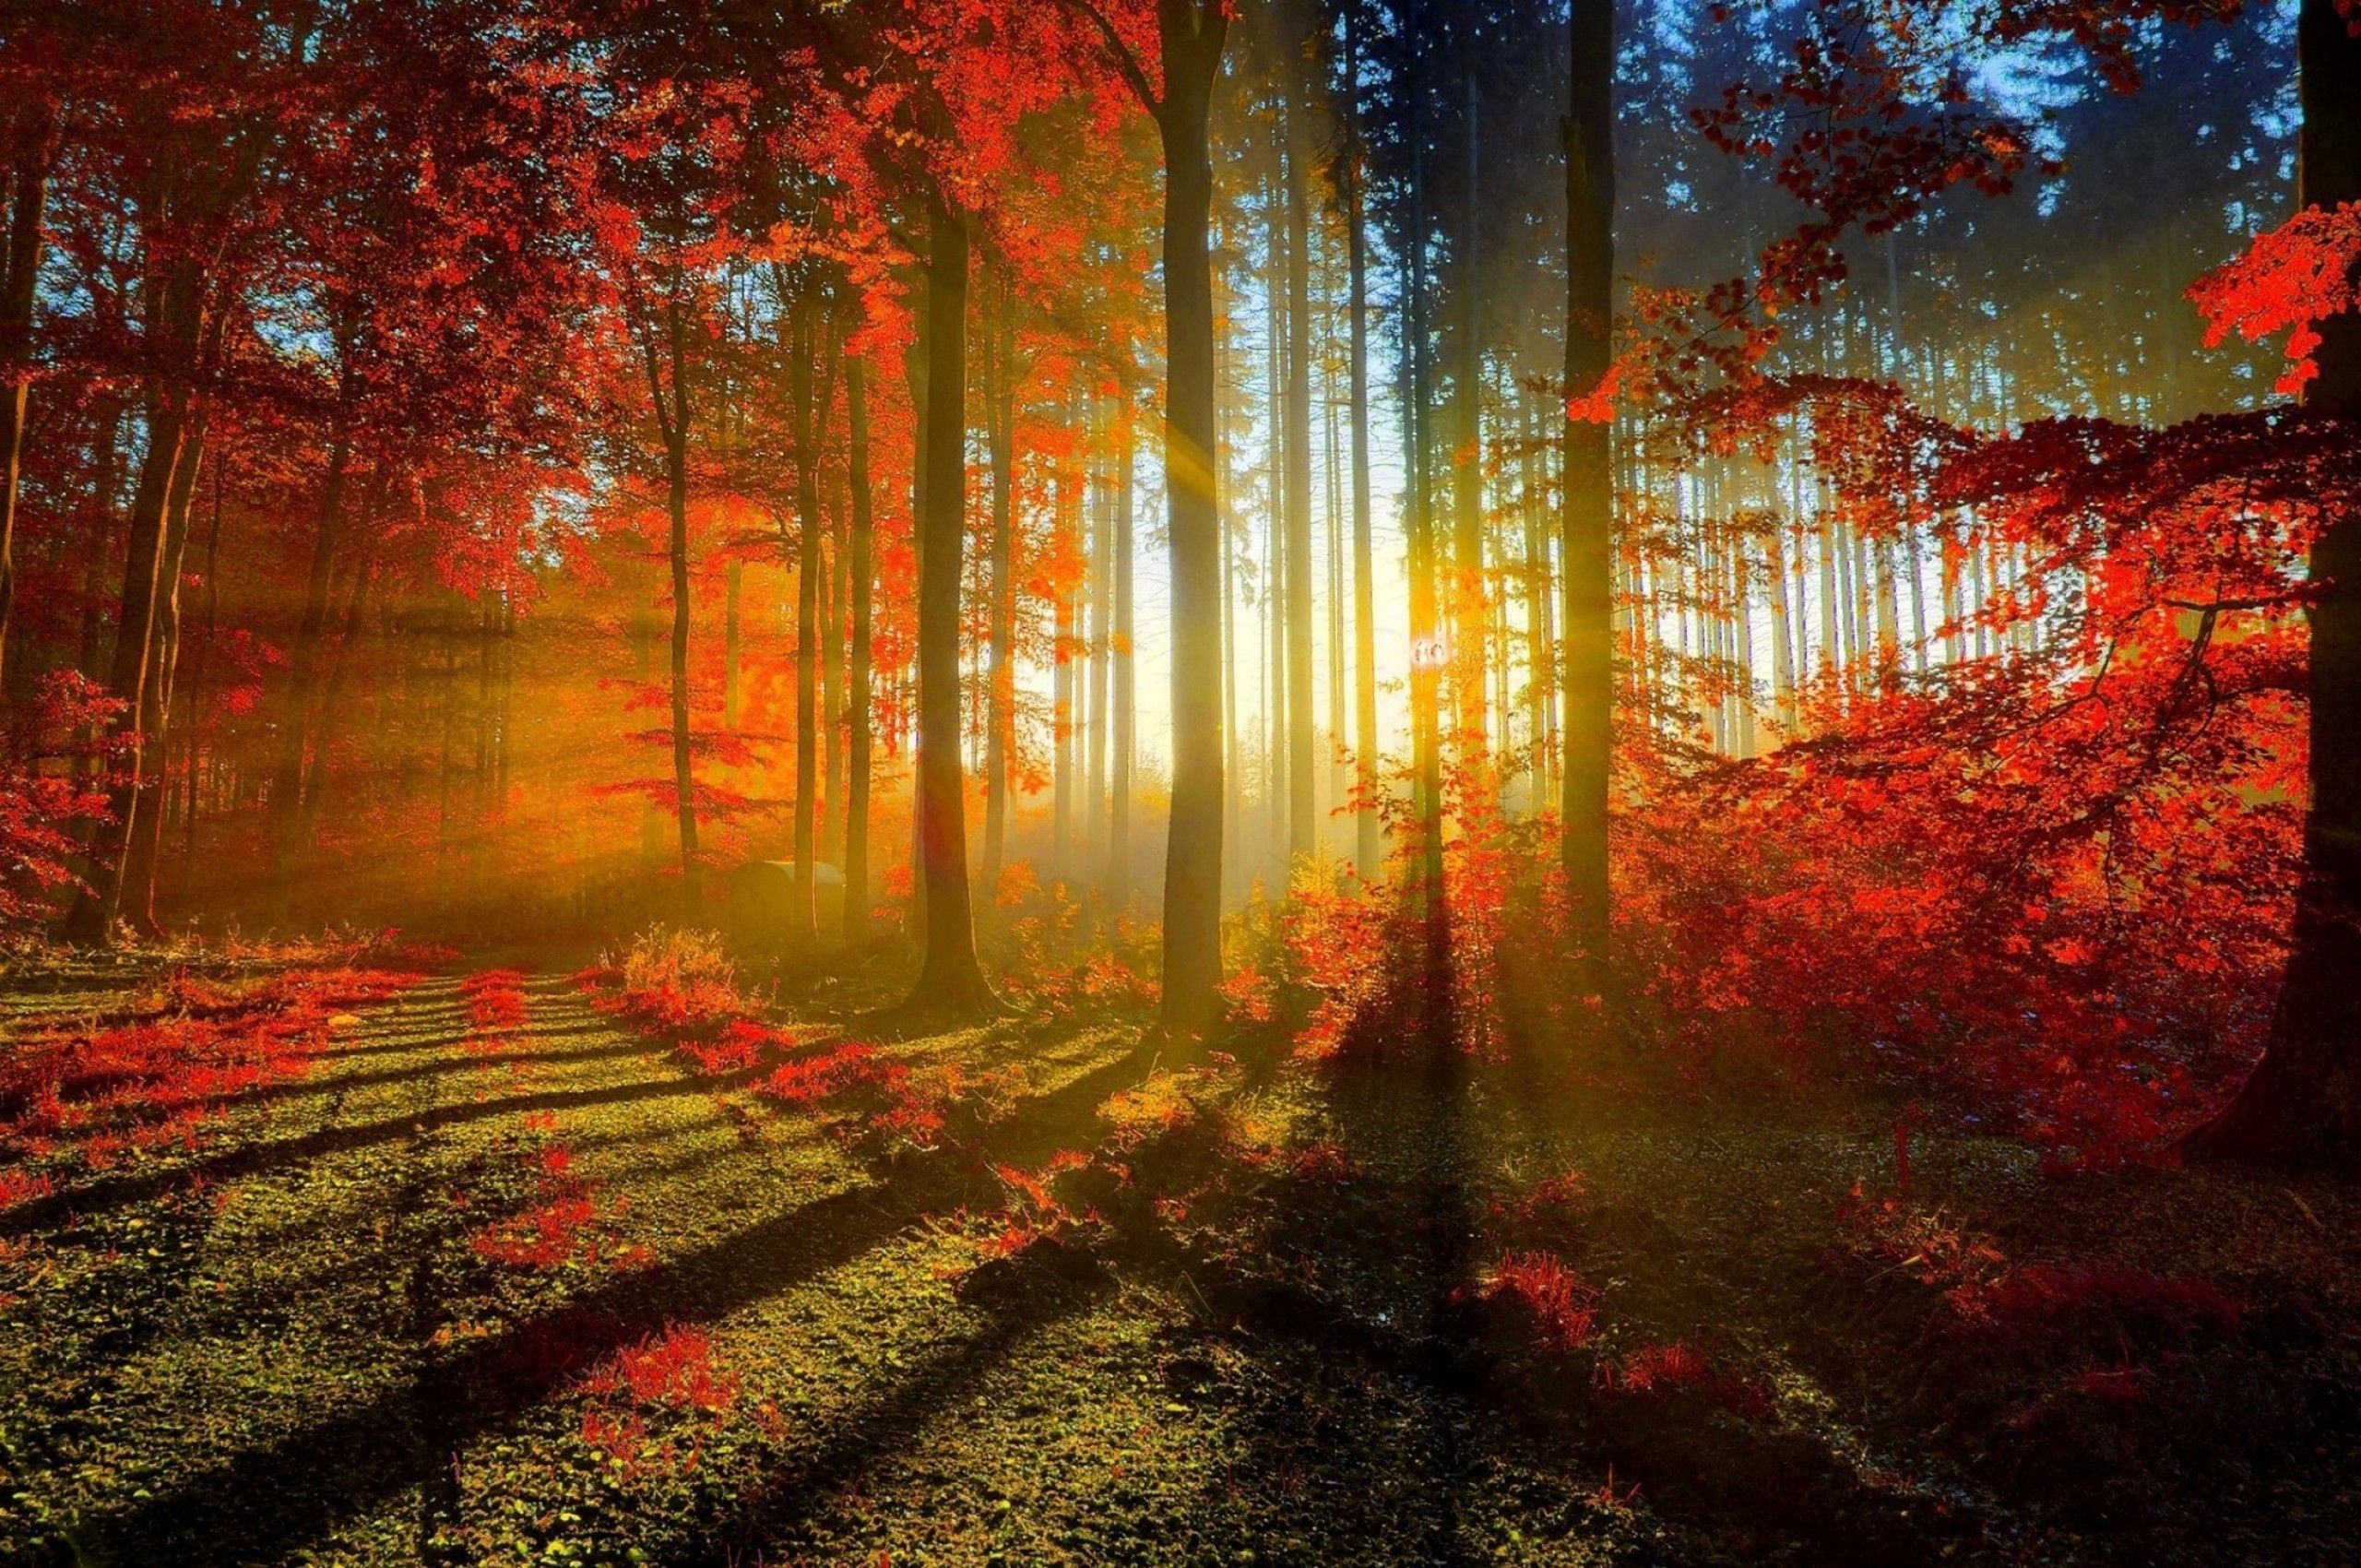 Download 2560x1700 Autumn, Sunrays, Trees, Forest, Fall Wallpaper for Chromebook Pixel